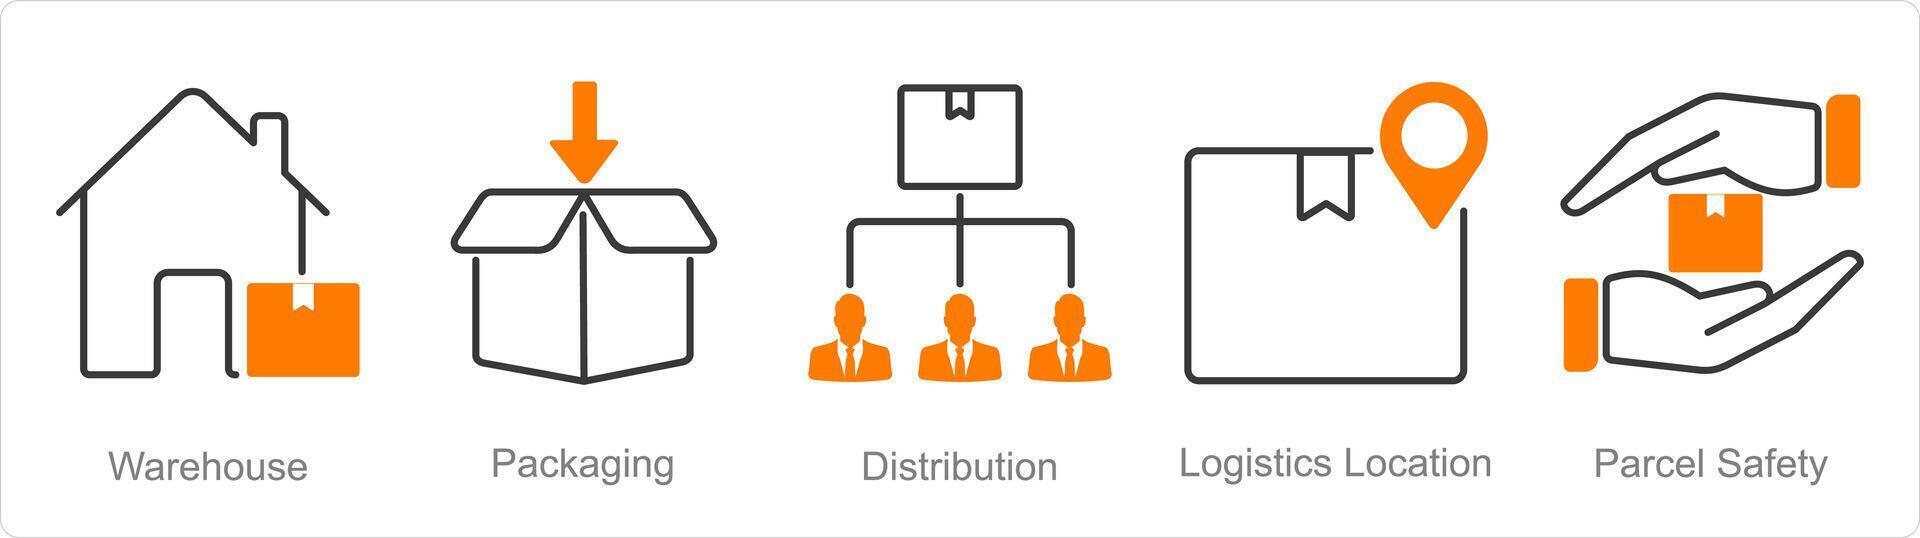 A set of 5 Logistics icons as warehouse, packaging, distribution vector